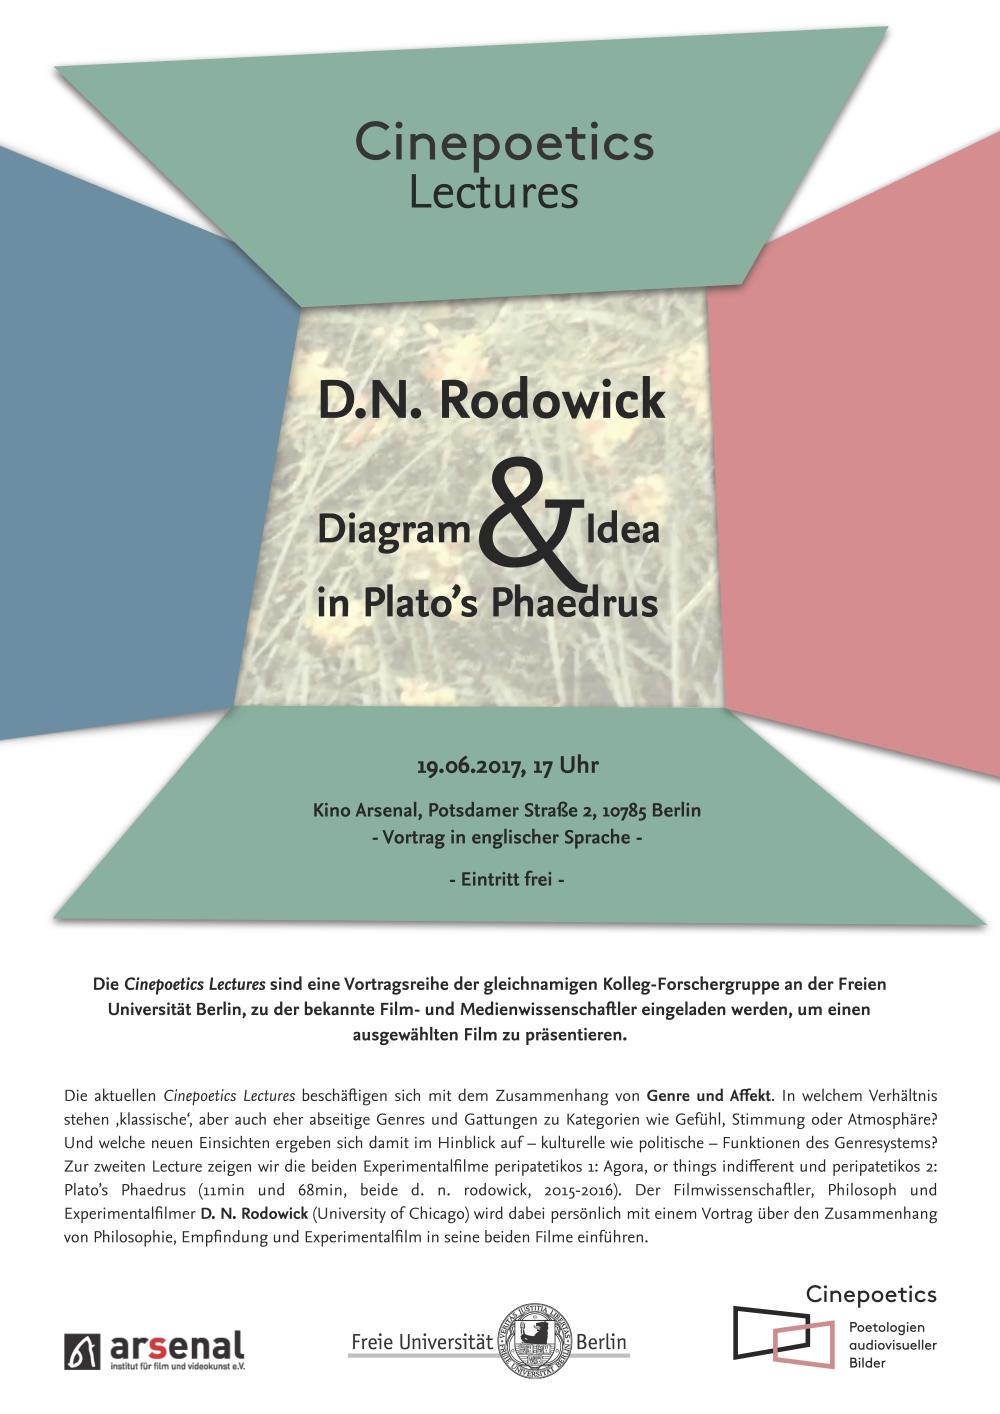 Cinepoetics Lecture: D.N. Rodowick